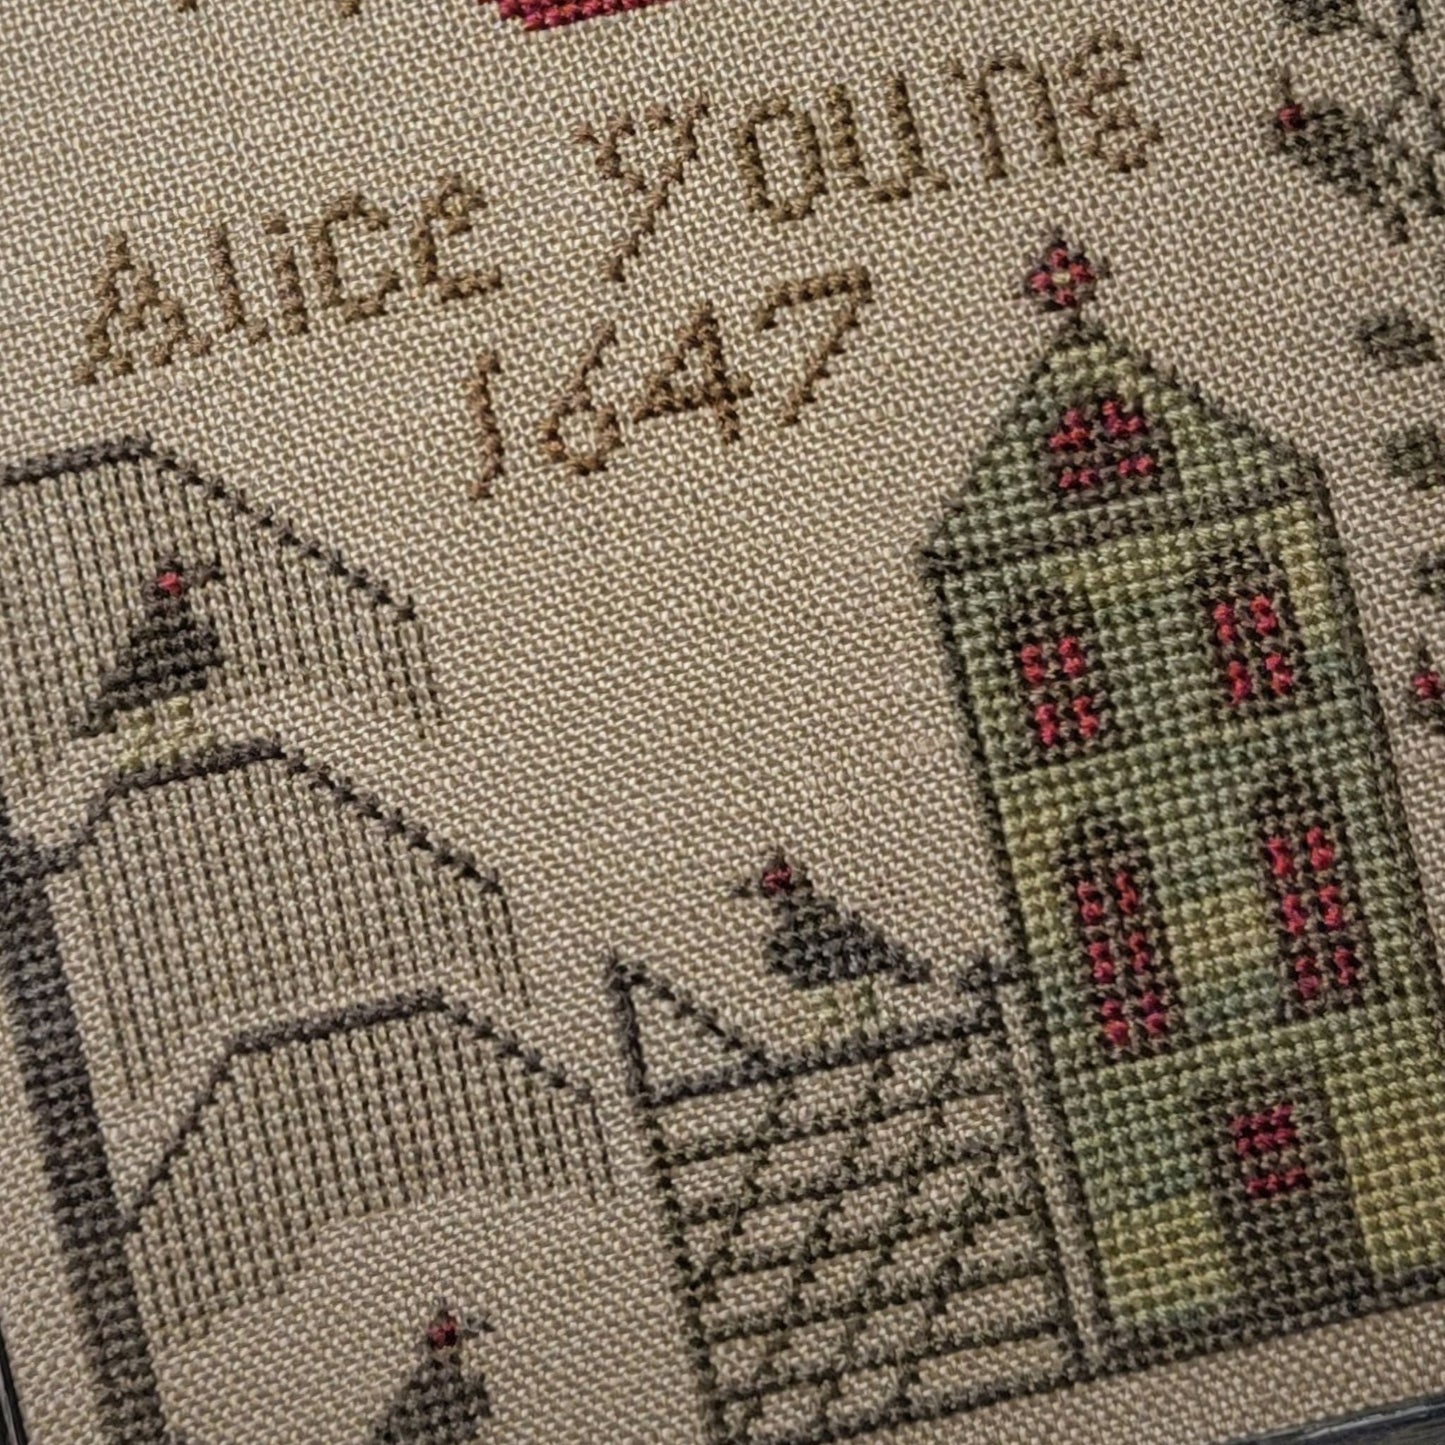 Alice Young 1647 Sampler Paper Chart